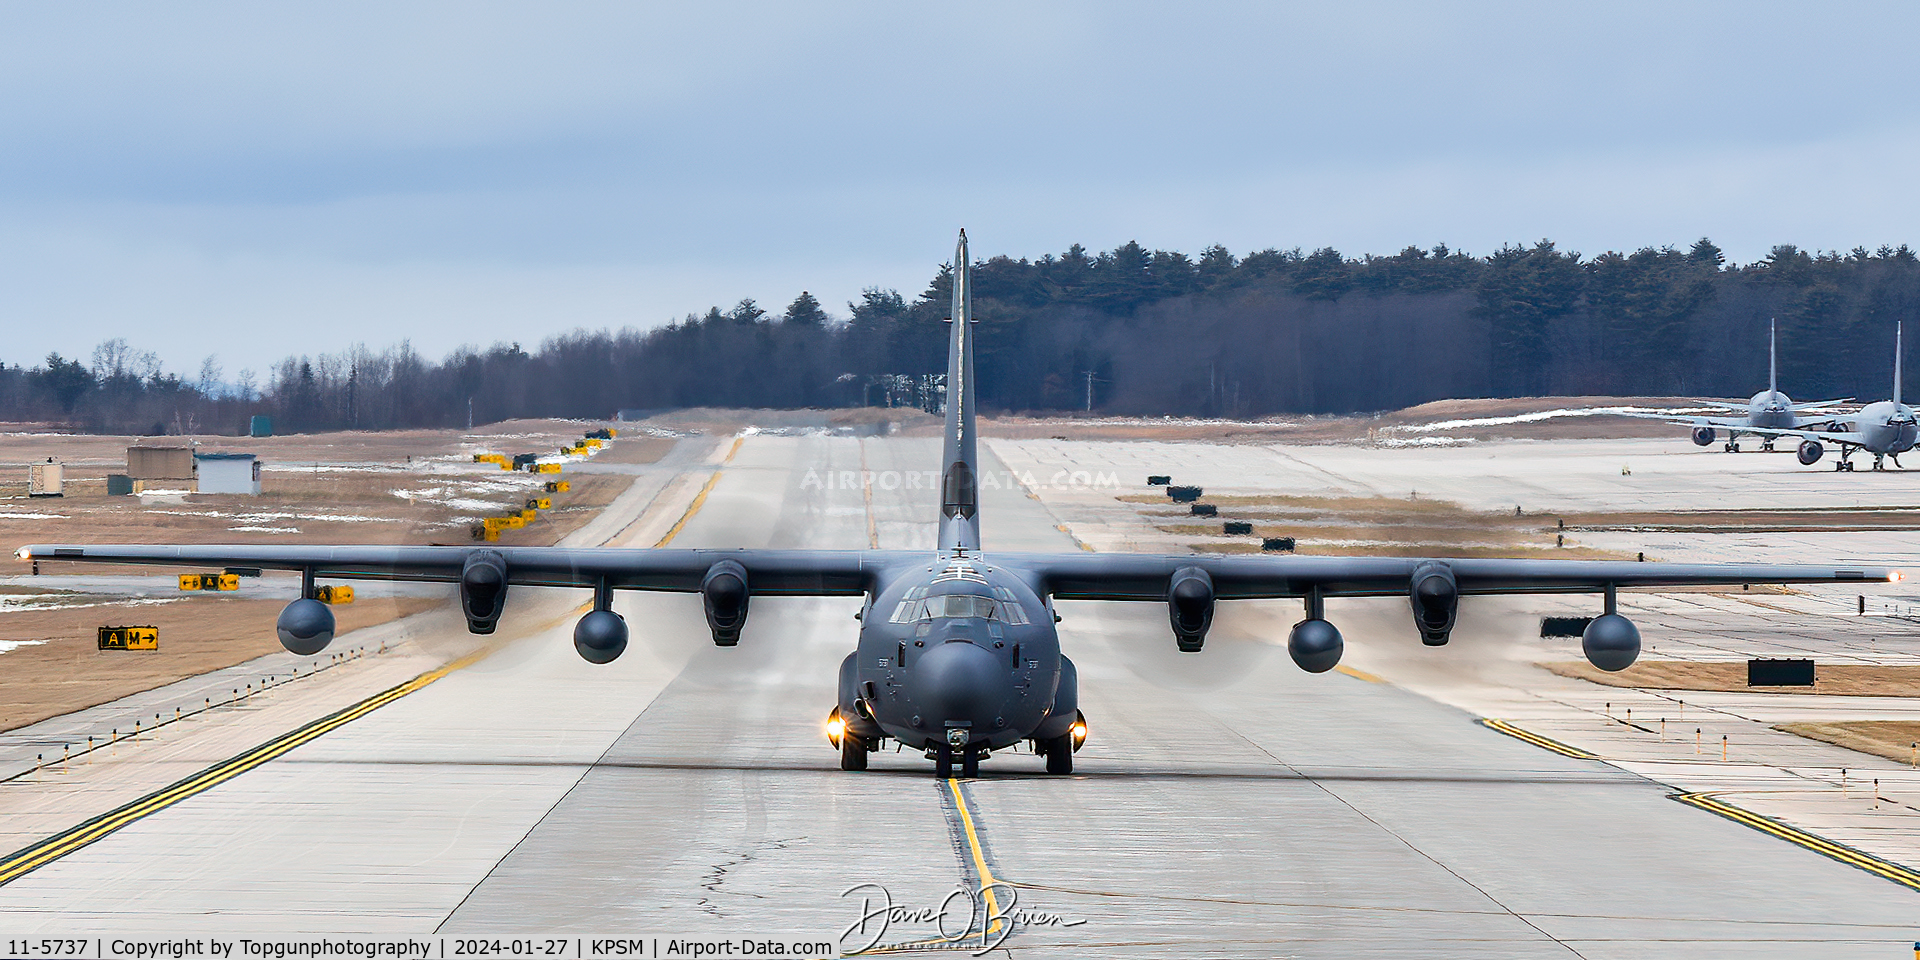 11-5737, 2011 Lockheed Martin MC-130J Commando II C/N 382-5737, DAGGER67 came up this weekend for some local flying